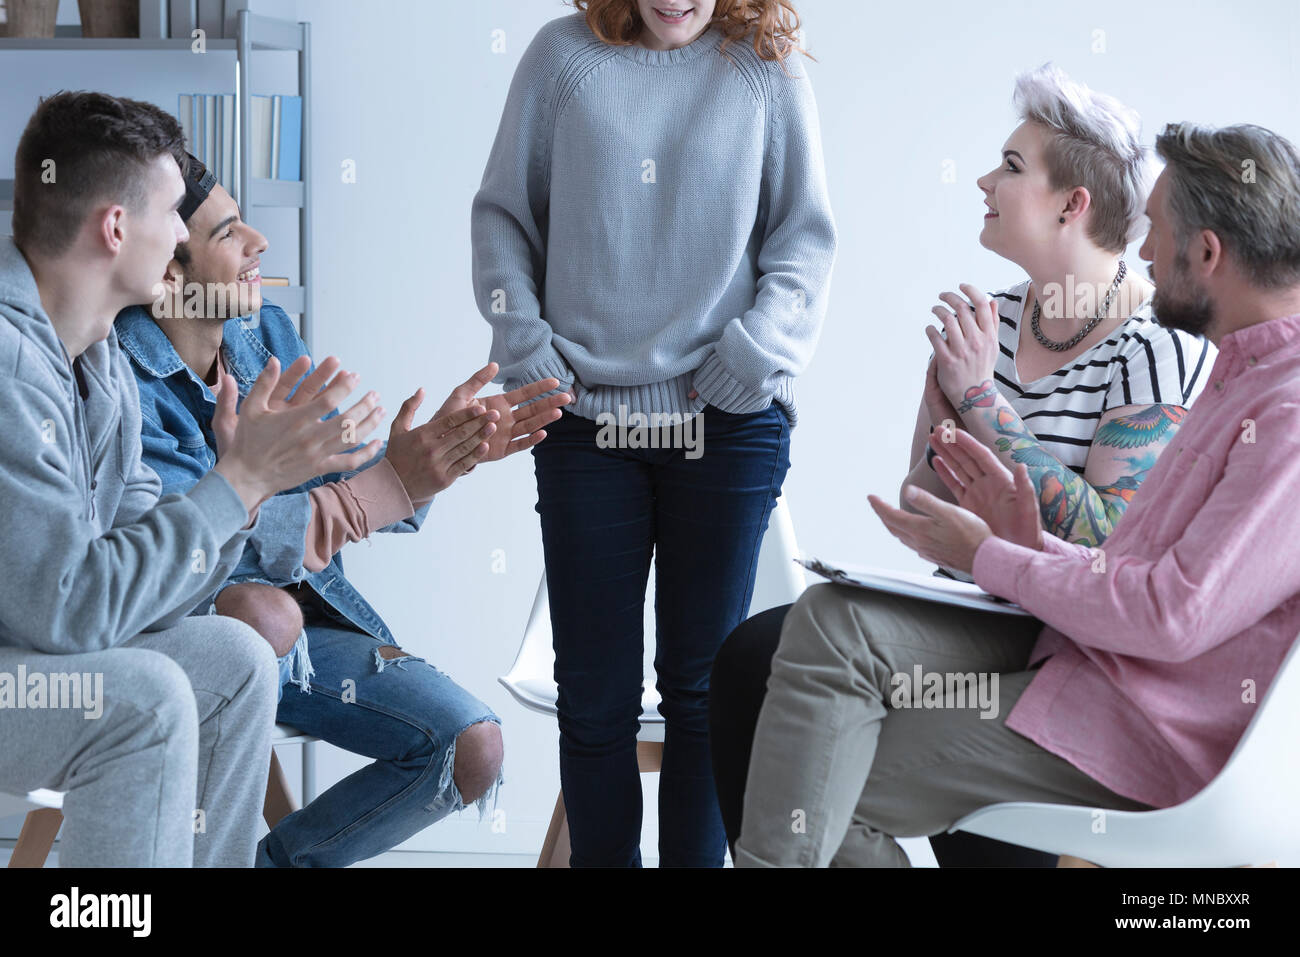 Girl overcoming depression, talking in front of support group Stock Photo